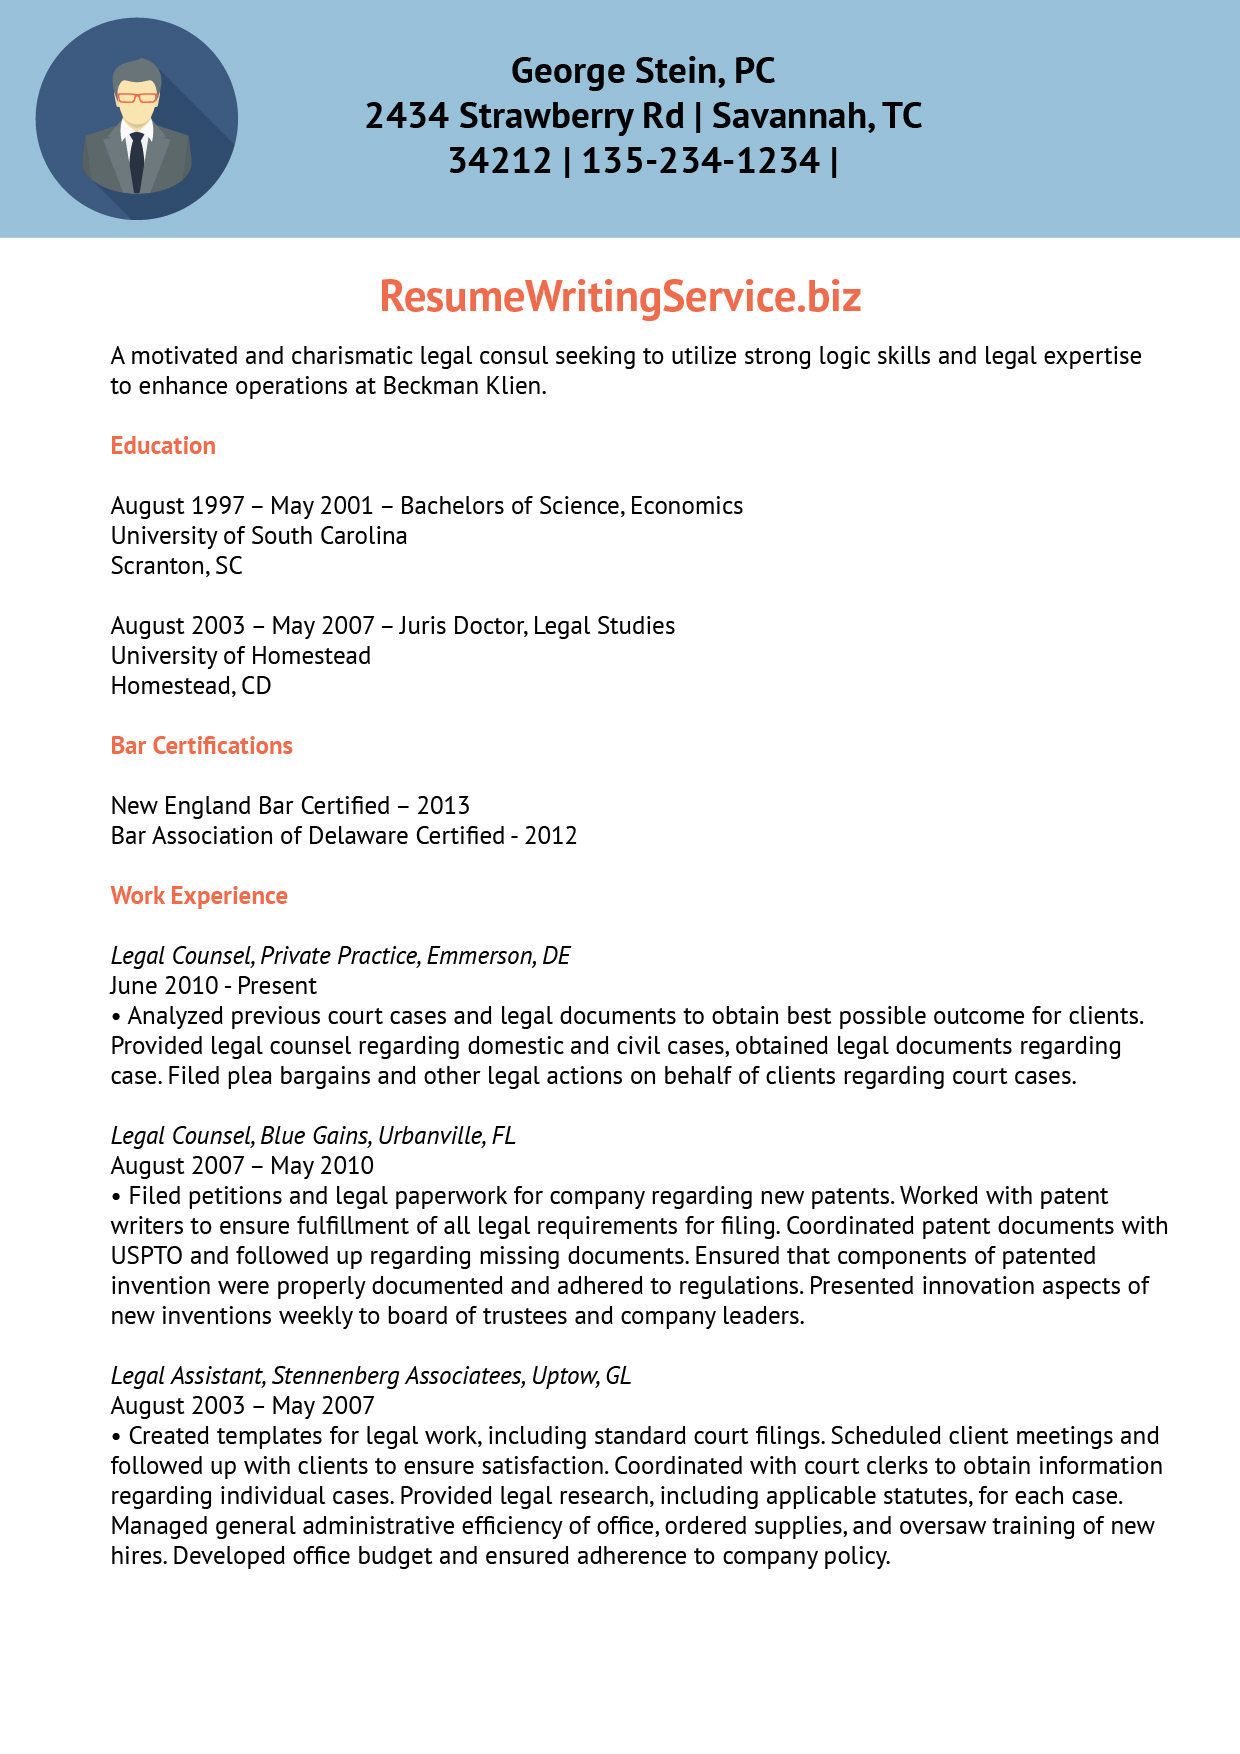 Legal resume writing services with samples